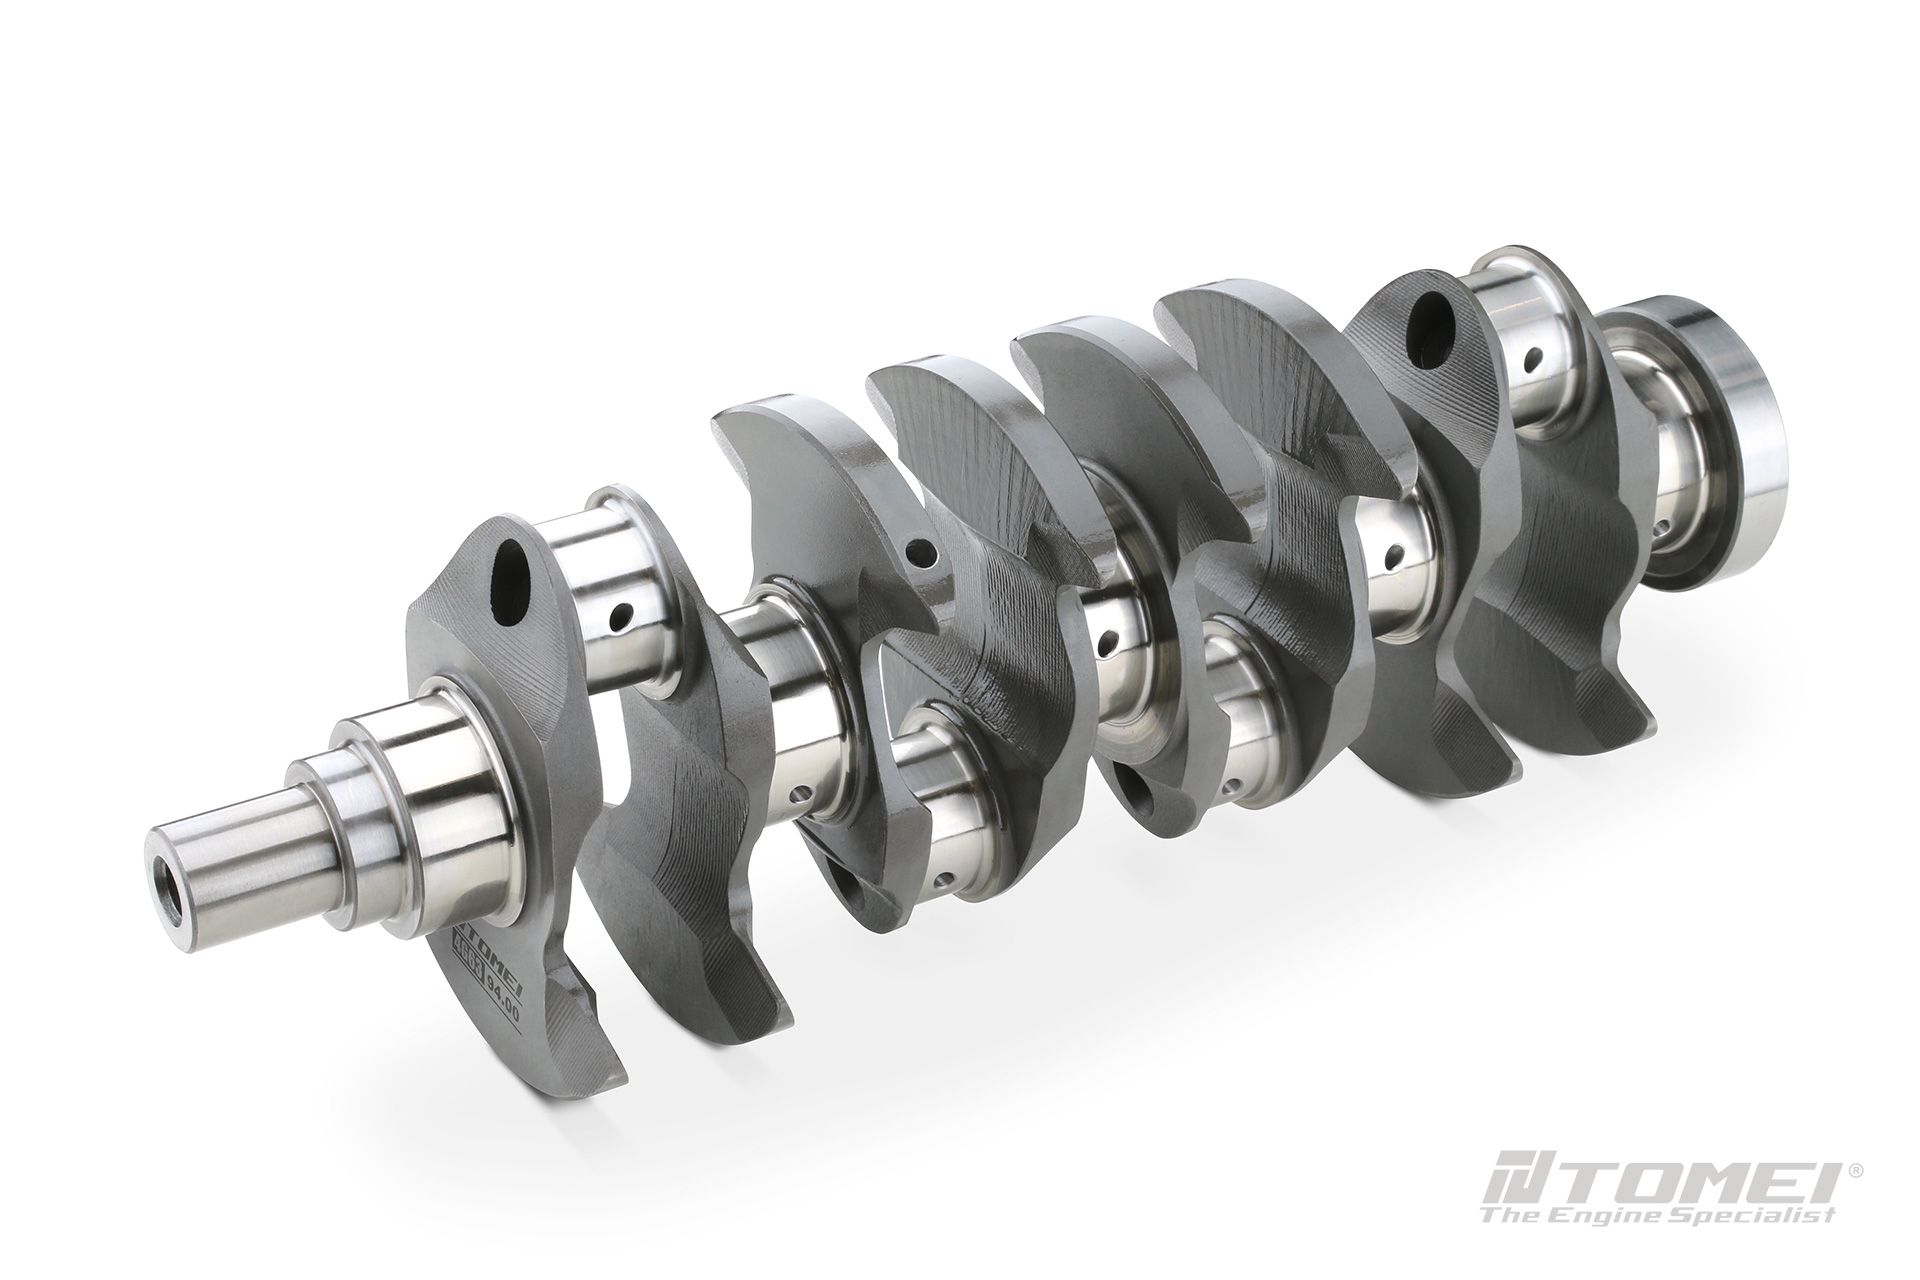 Tomei Forged Full Counterweight Crankshaft 4G63 2.2L